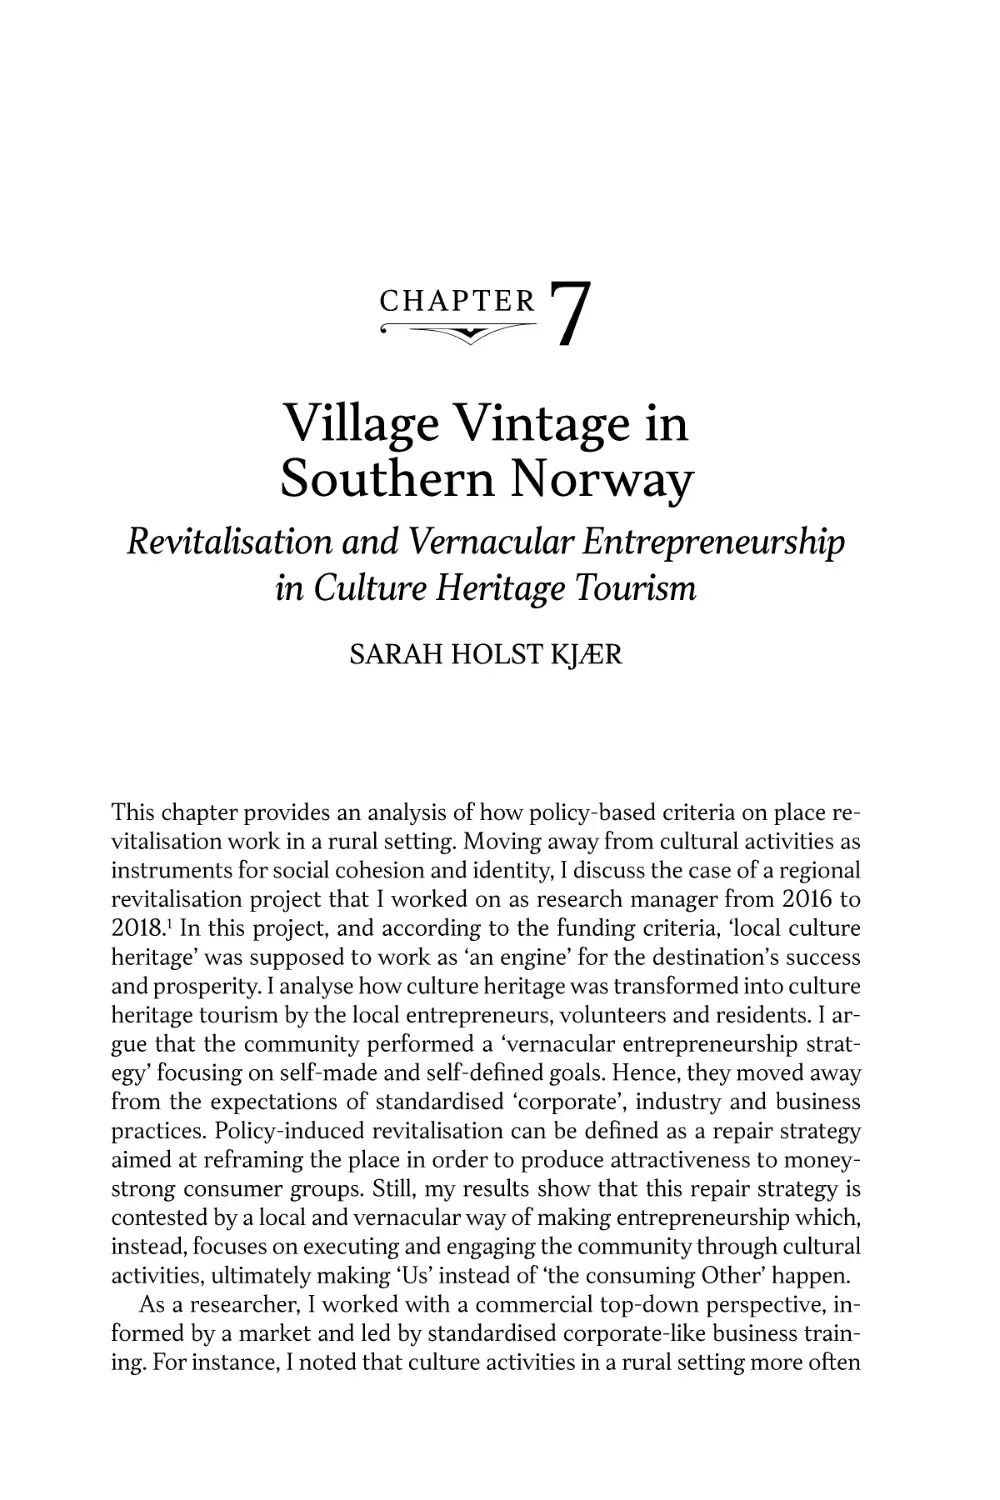 Chapter 7. Village Vintage in Southern Norway